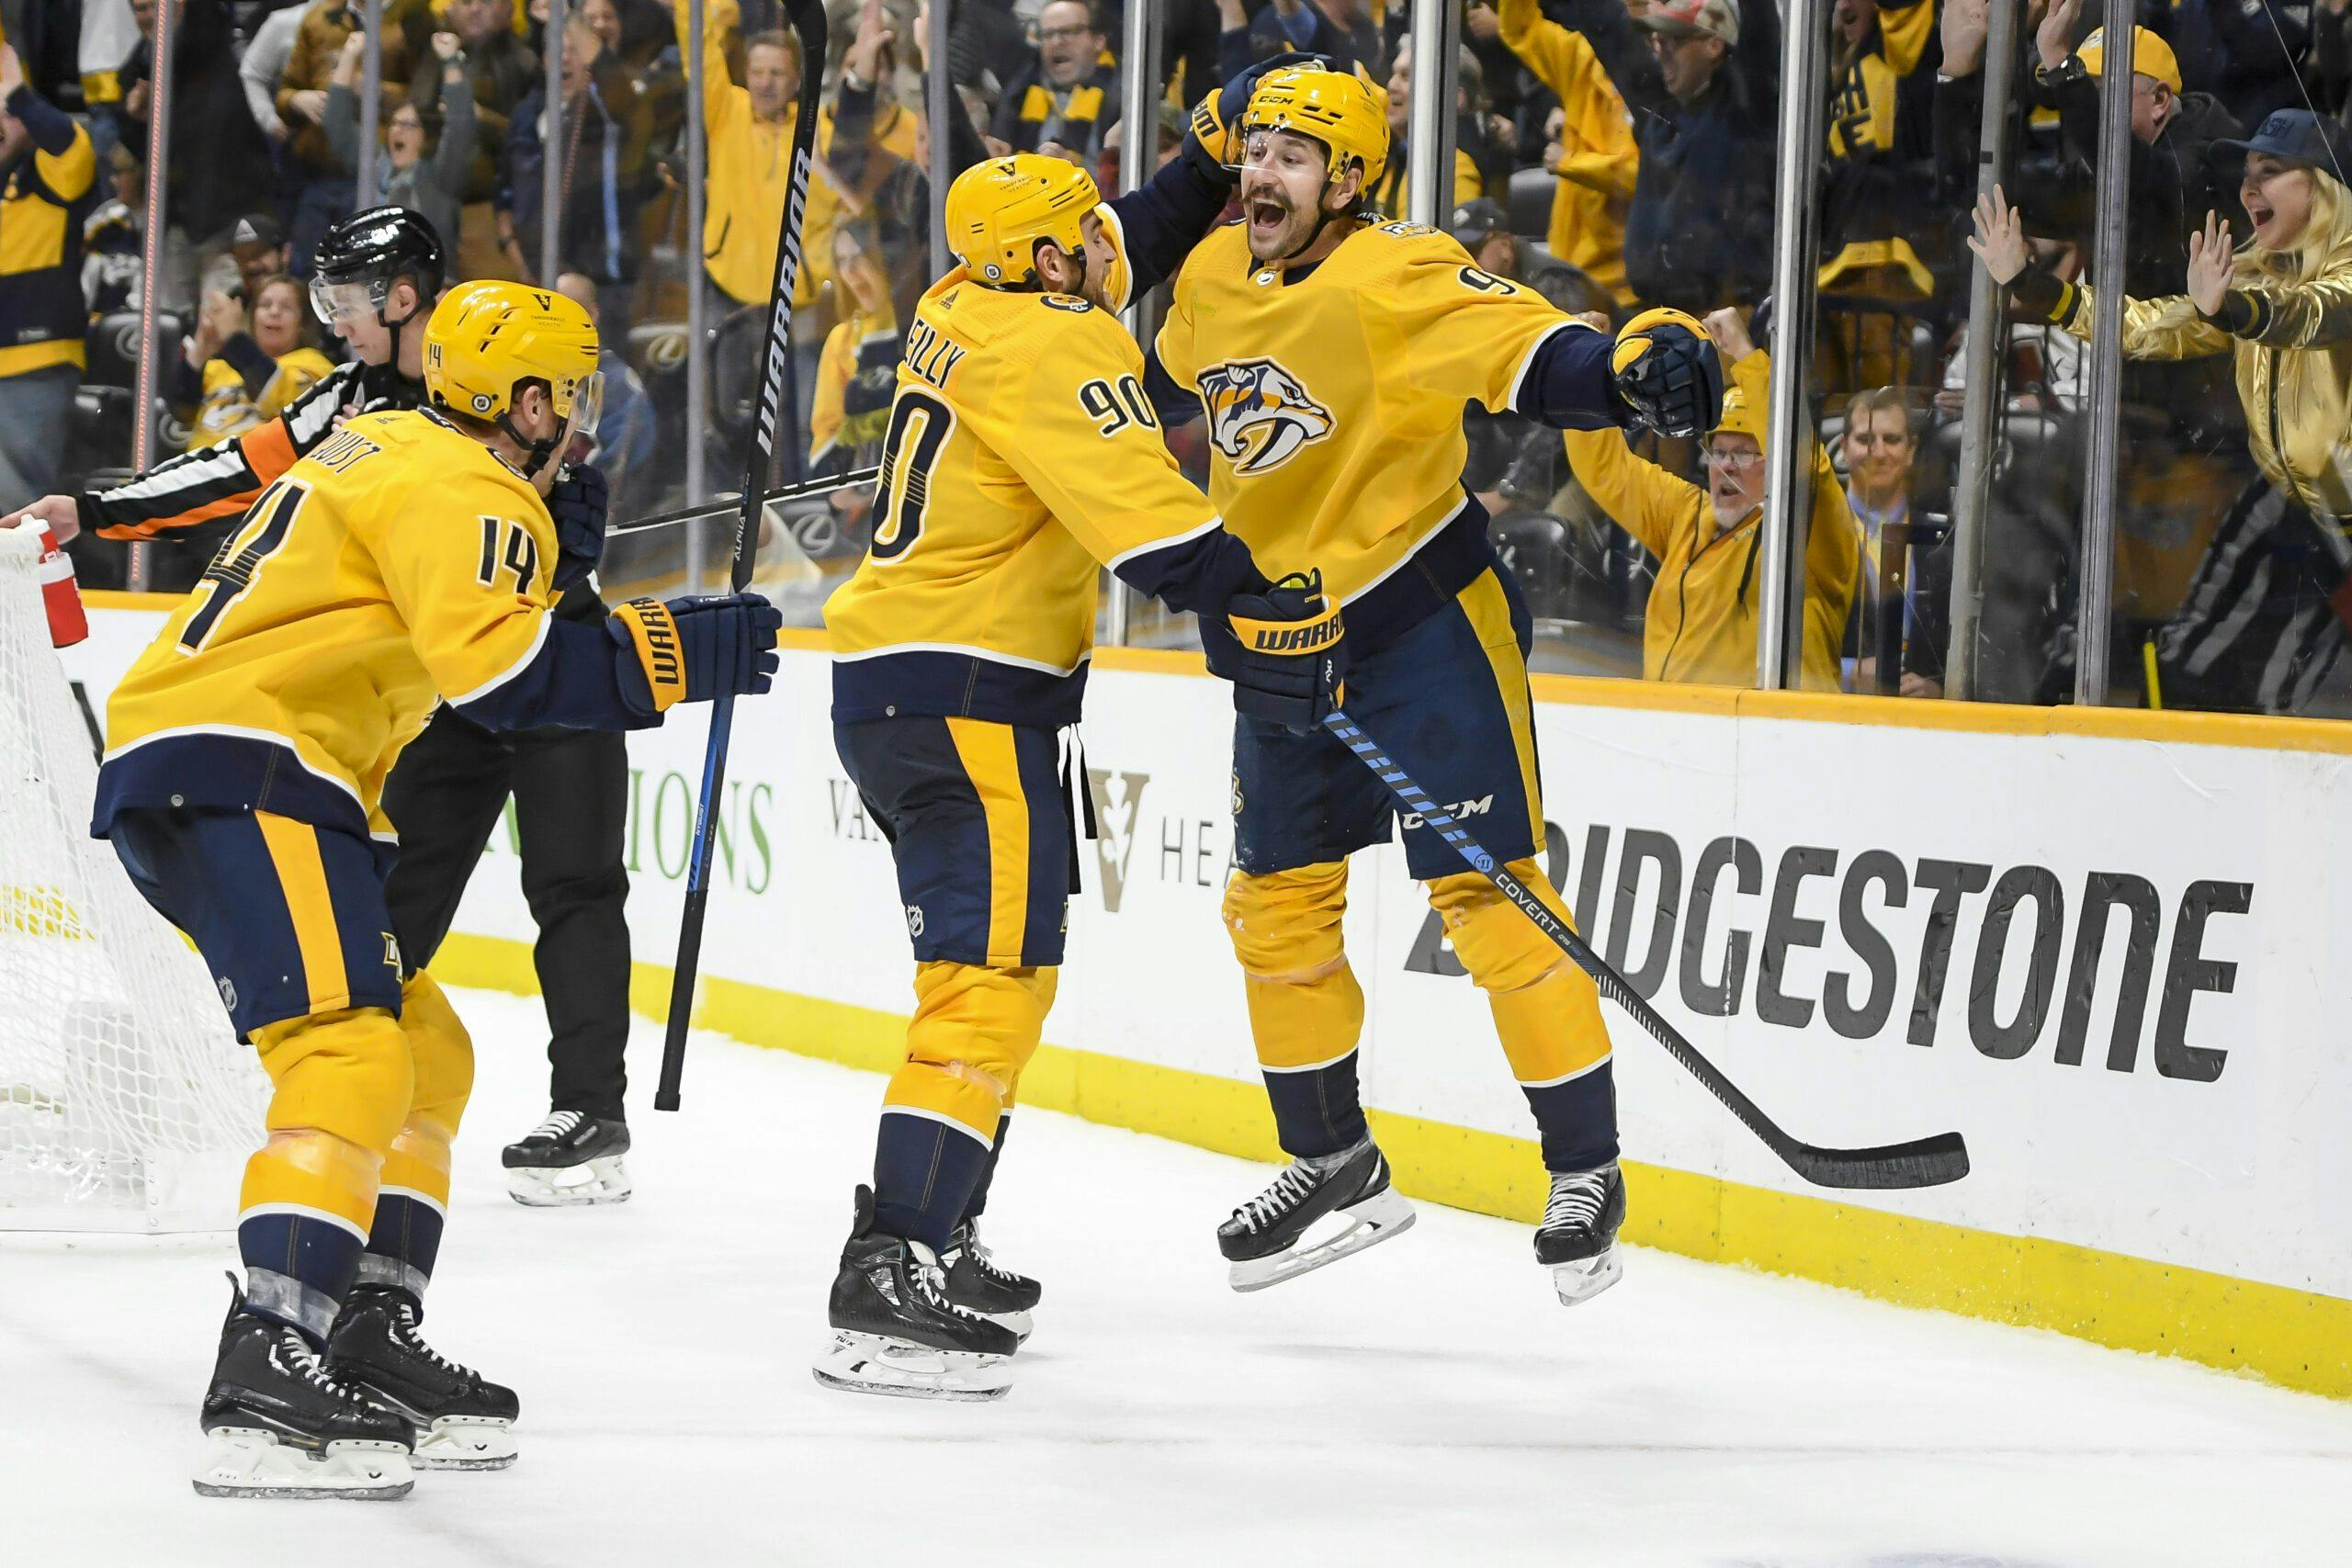 Predators’ Filip Forsberg on playing with Nyquist, O’Reilly: ‘We developed fantastic chemistry from Day 1’